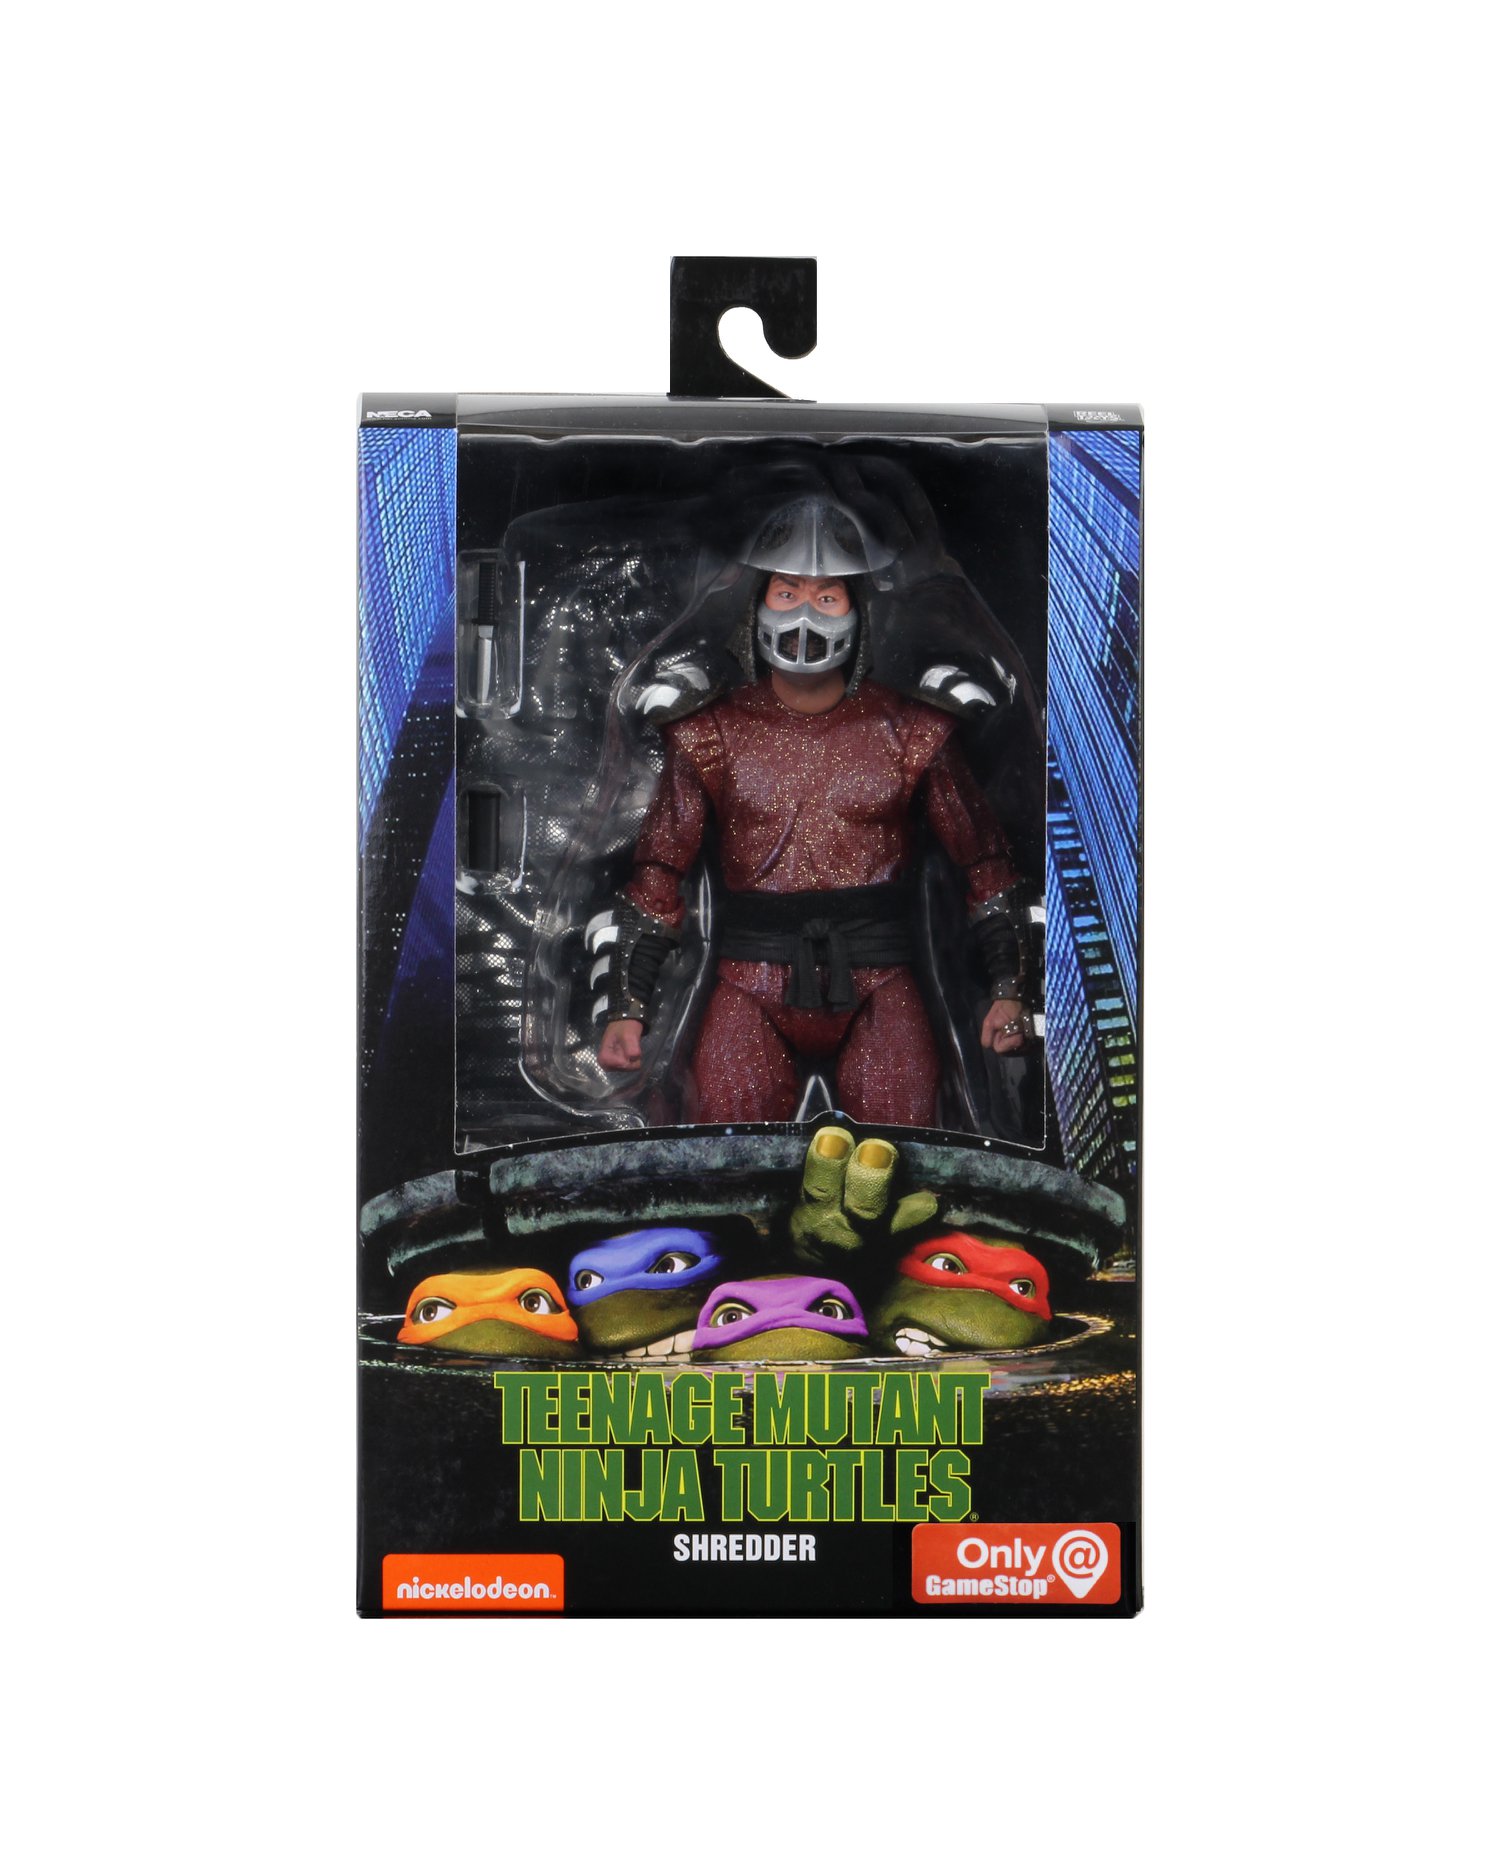 https://bleedingcool.com/collectibles/tmnt-neca-reveals-new-two-packs-1990-film-figure-packaging/attachment/neca-tmnt-1990-3/